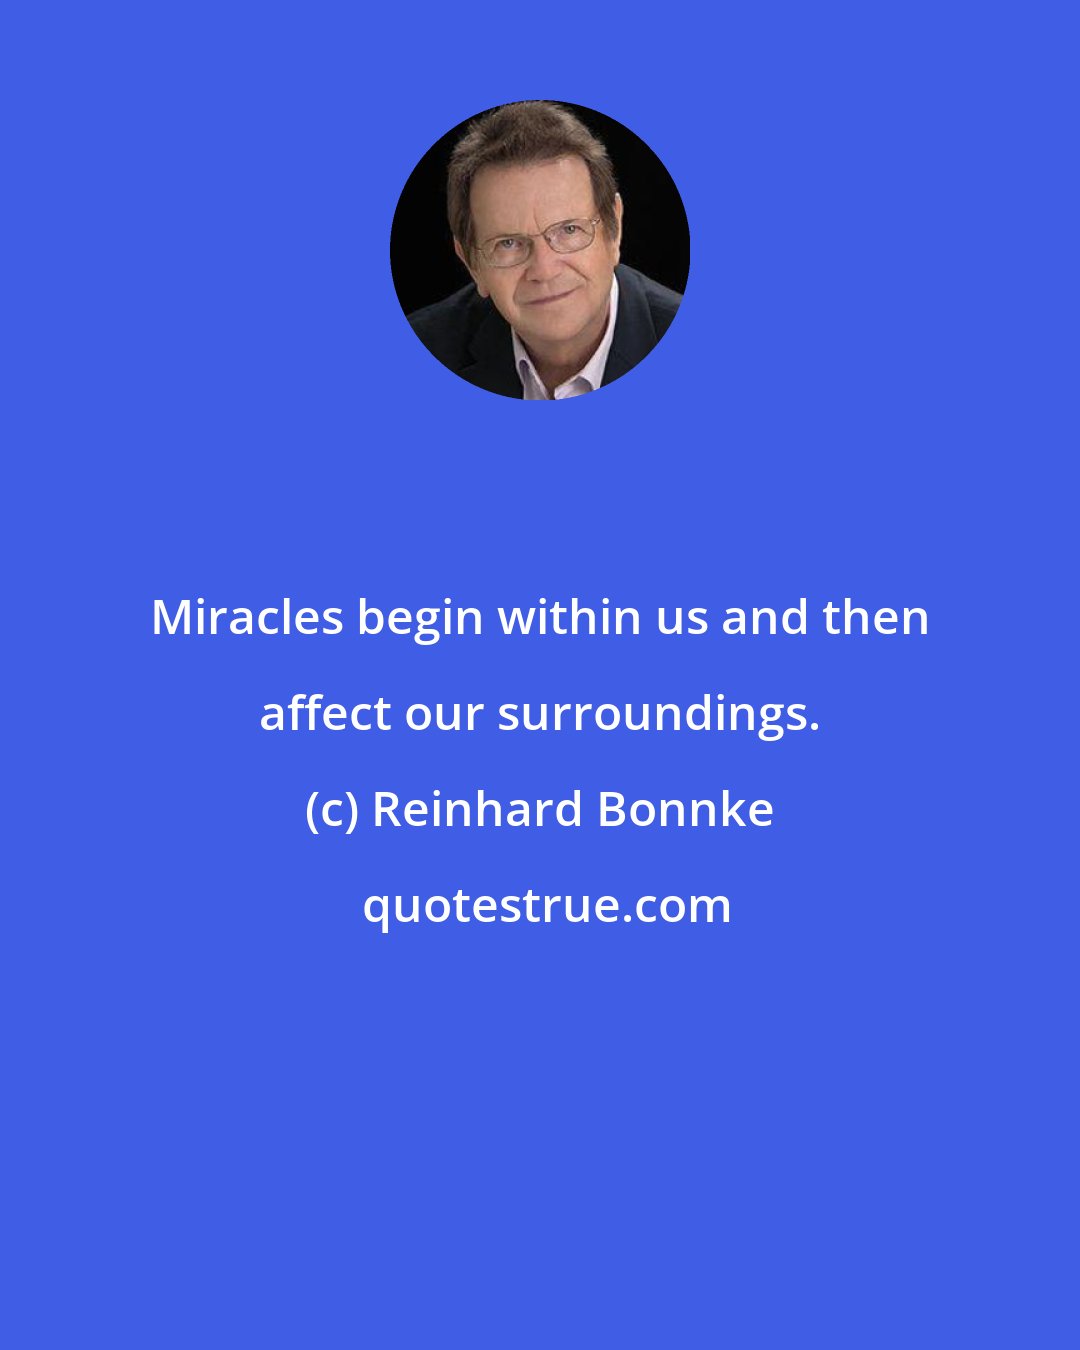 Reinhard Bonnke: Miracles begin within us and then affect our surroundings.